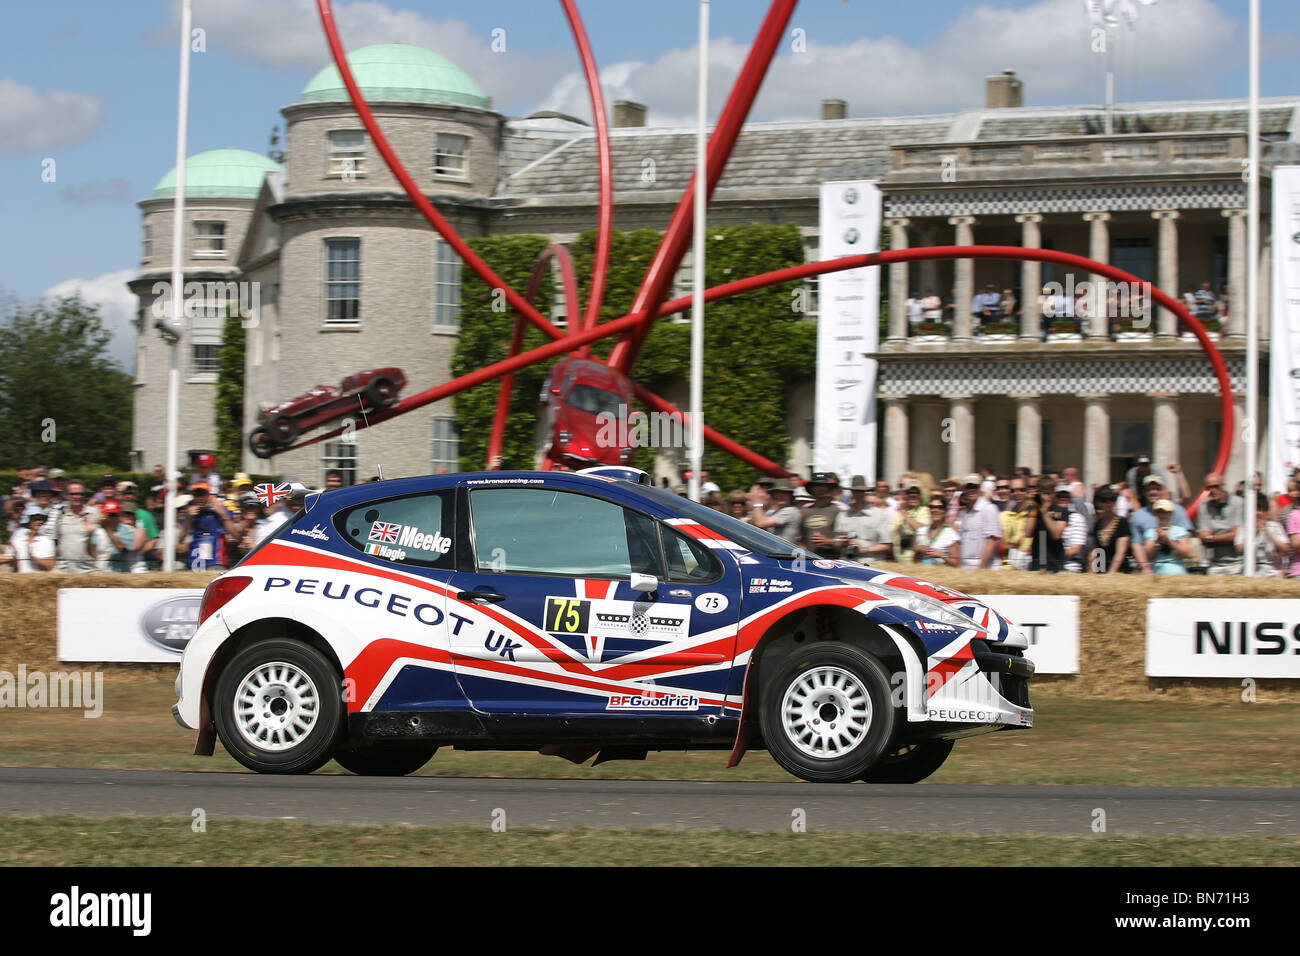 Kris Meeke powers his Peugeot 207 S2000 IRC rally car up the hill at the 2010 Goodwood Festival of Speed, Goodwood House. Stock Photo